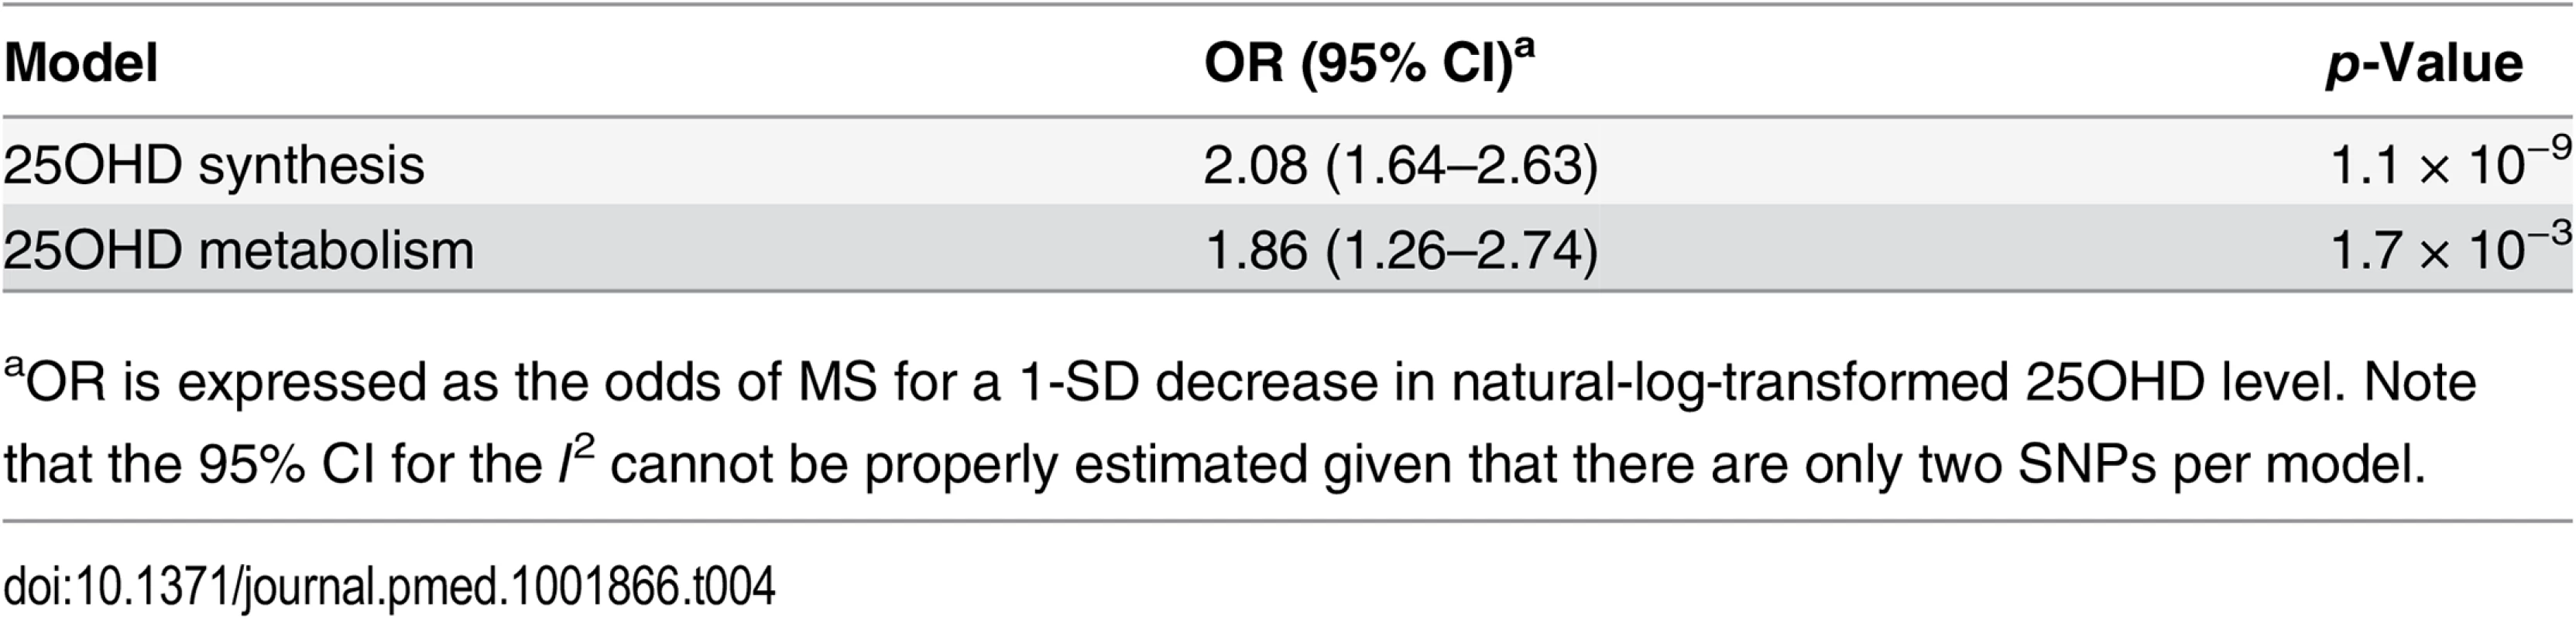 Mendelian randomization estimate of the association of decreased 25OHD with the risk of multiple sclerosis stratified by SNPs near genes involved in 25OHD synthesis versus metabolism using a fixed-effects model.